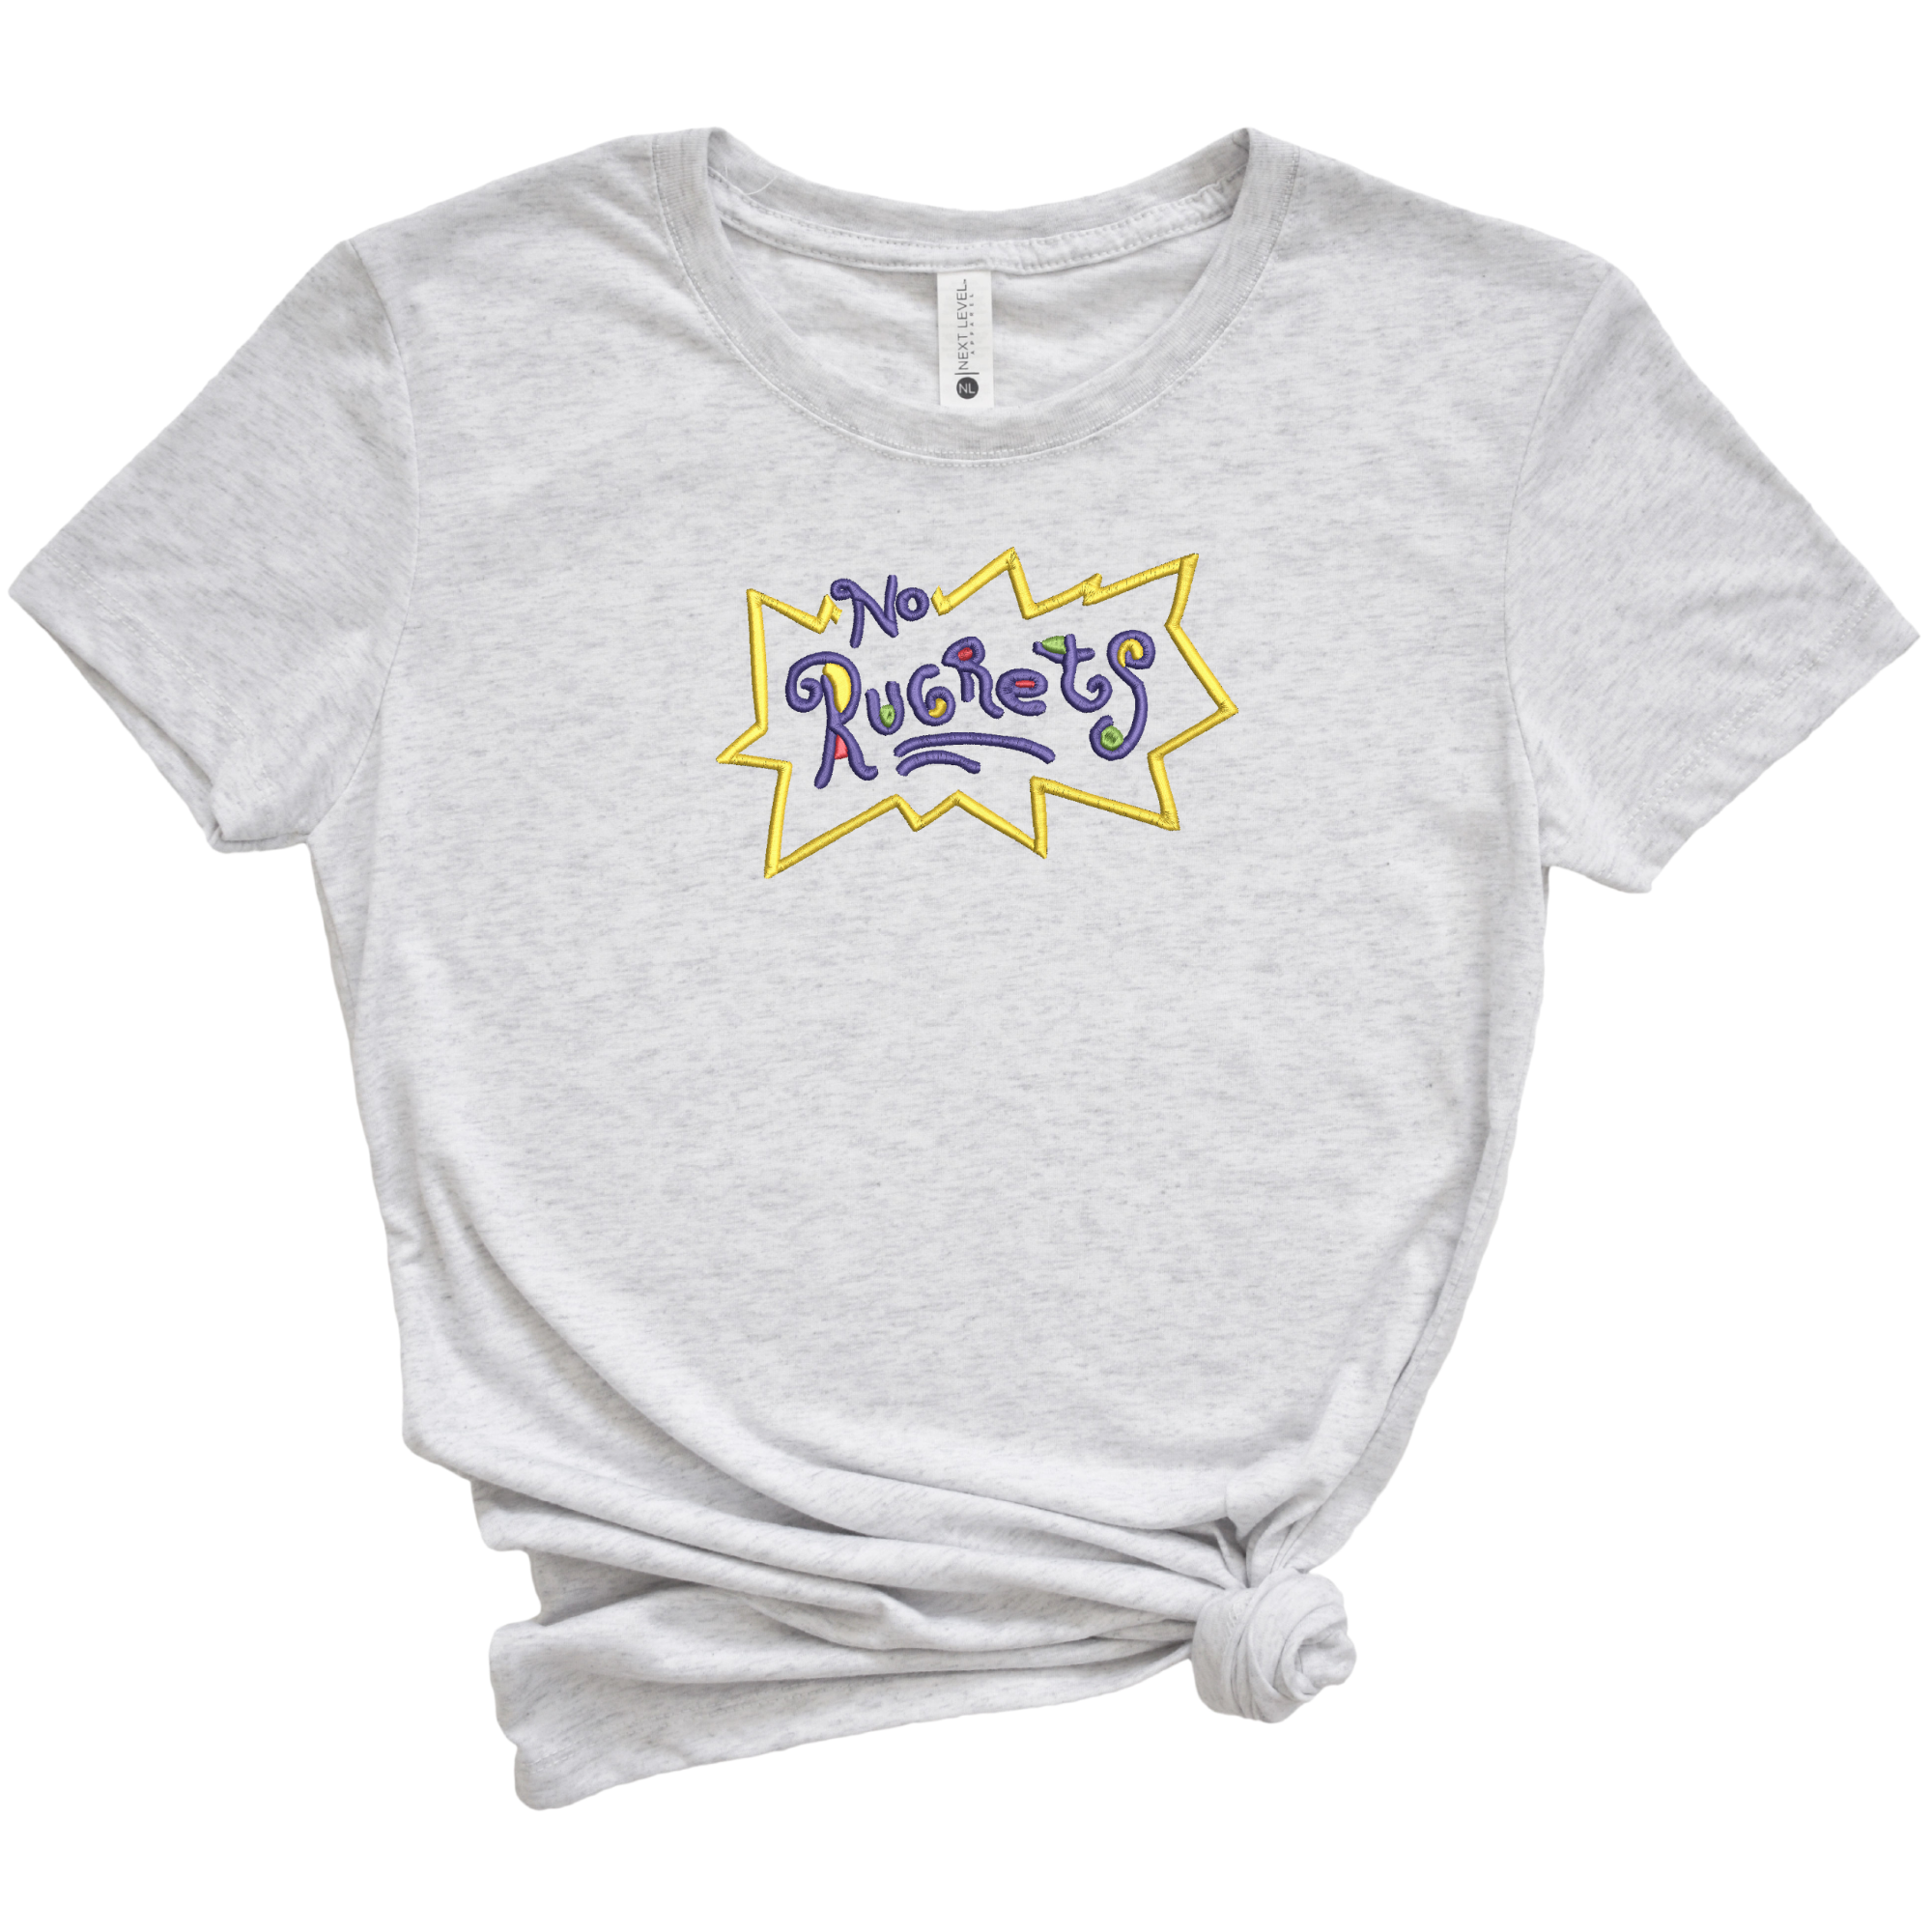 No Rugrets Rugrats Parody Embroidered Tee Shirt, Unisex